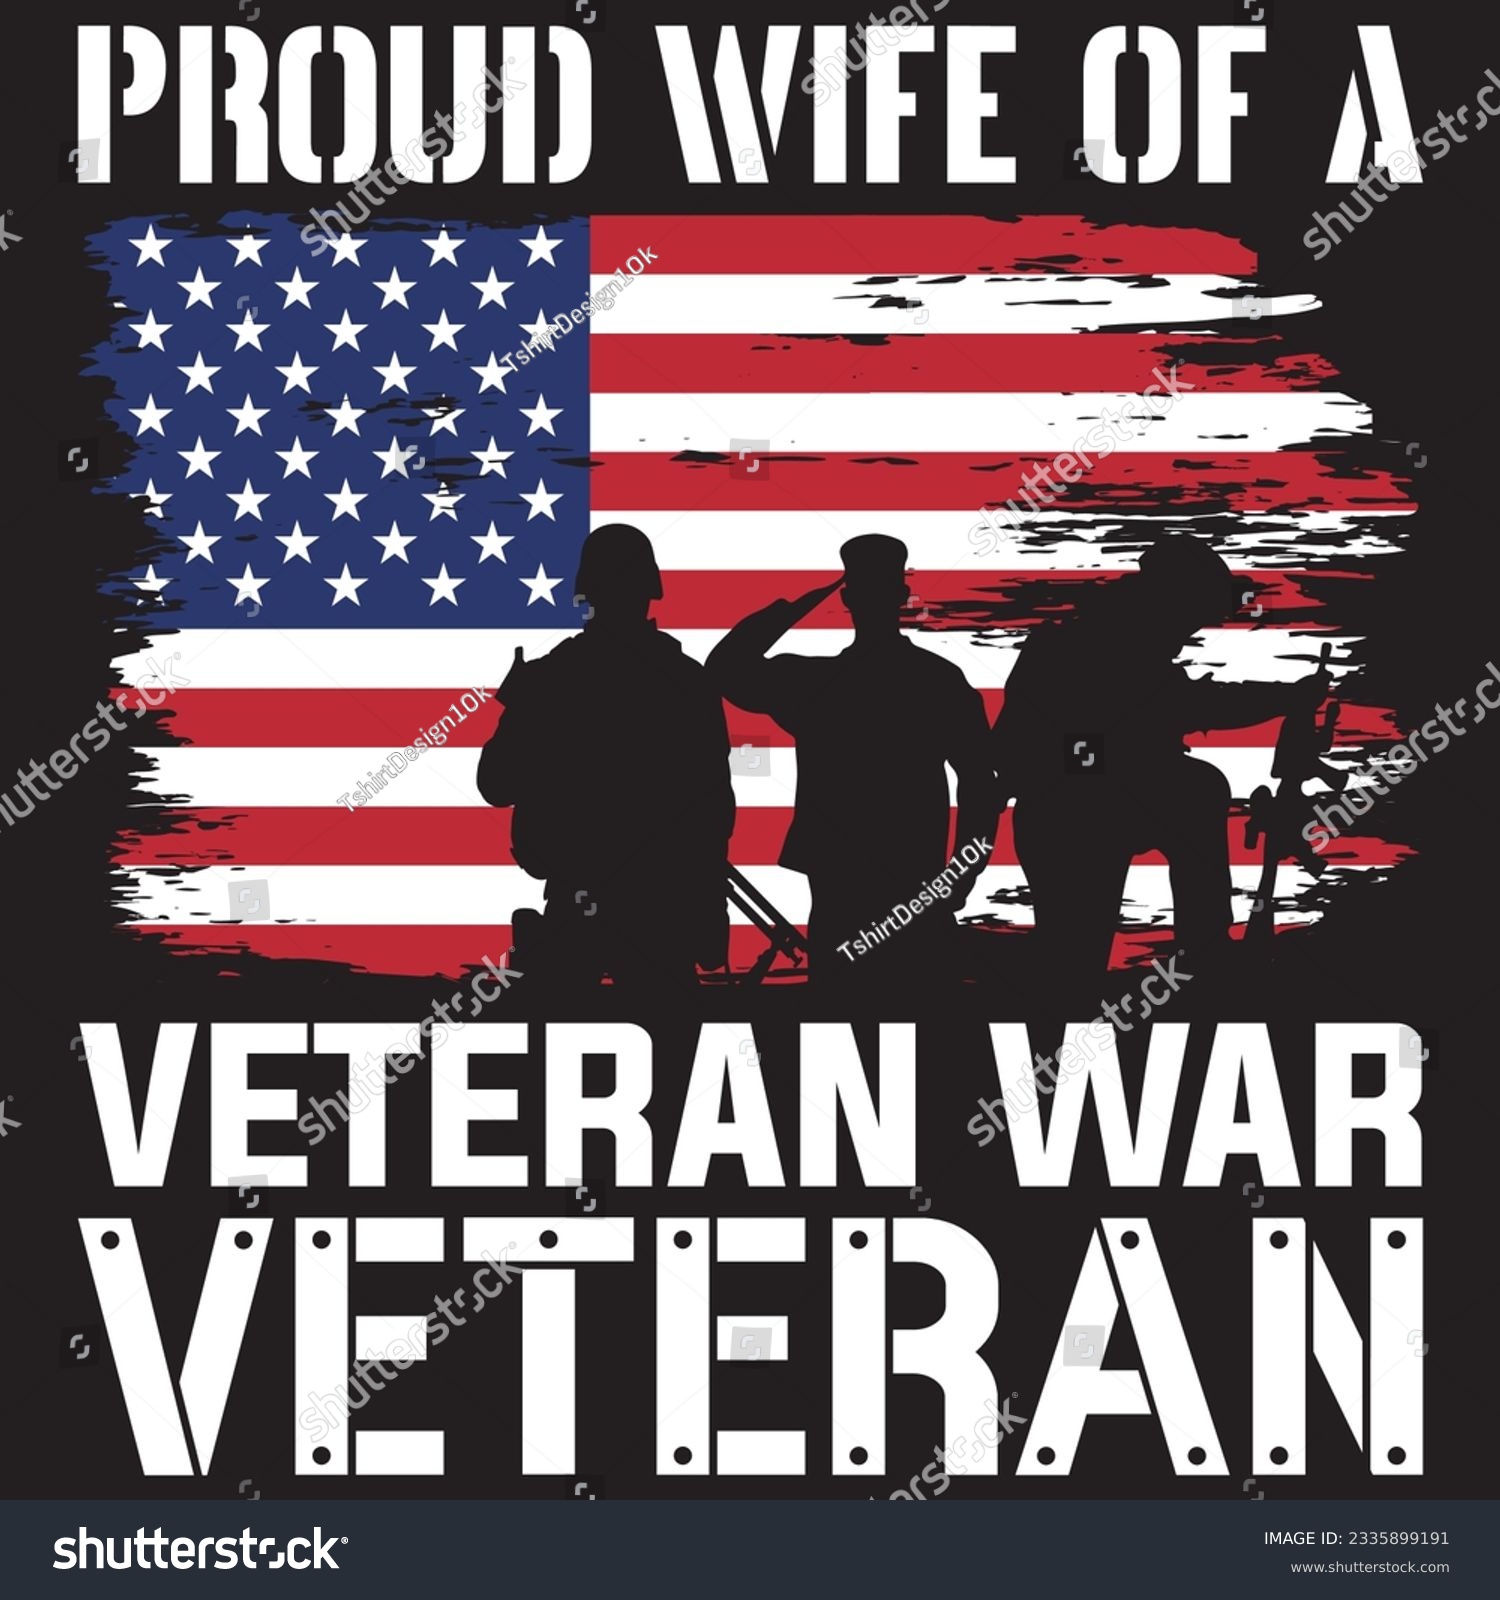 SVG of Proud wife of a veteran war army svg